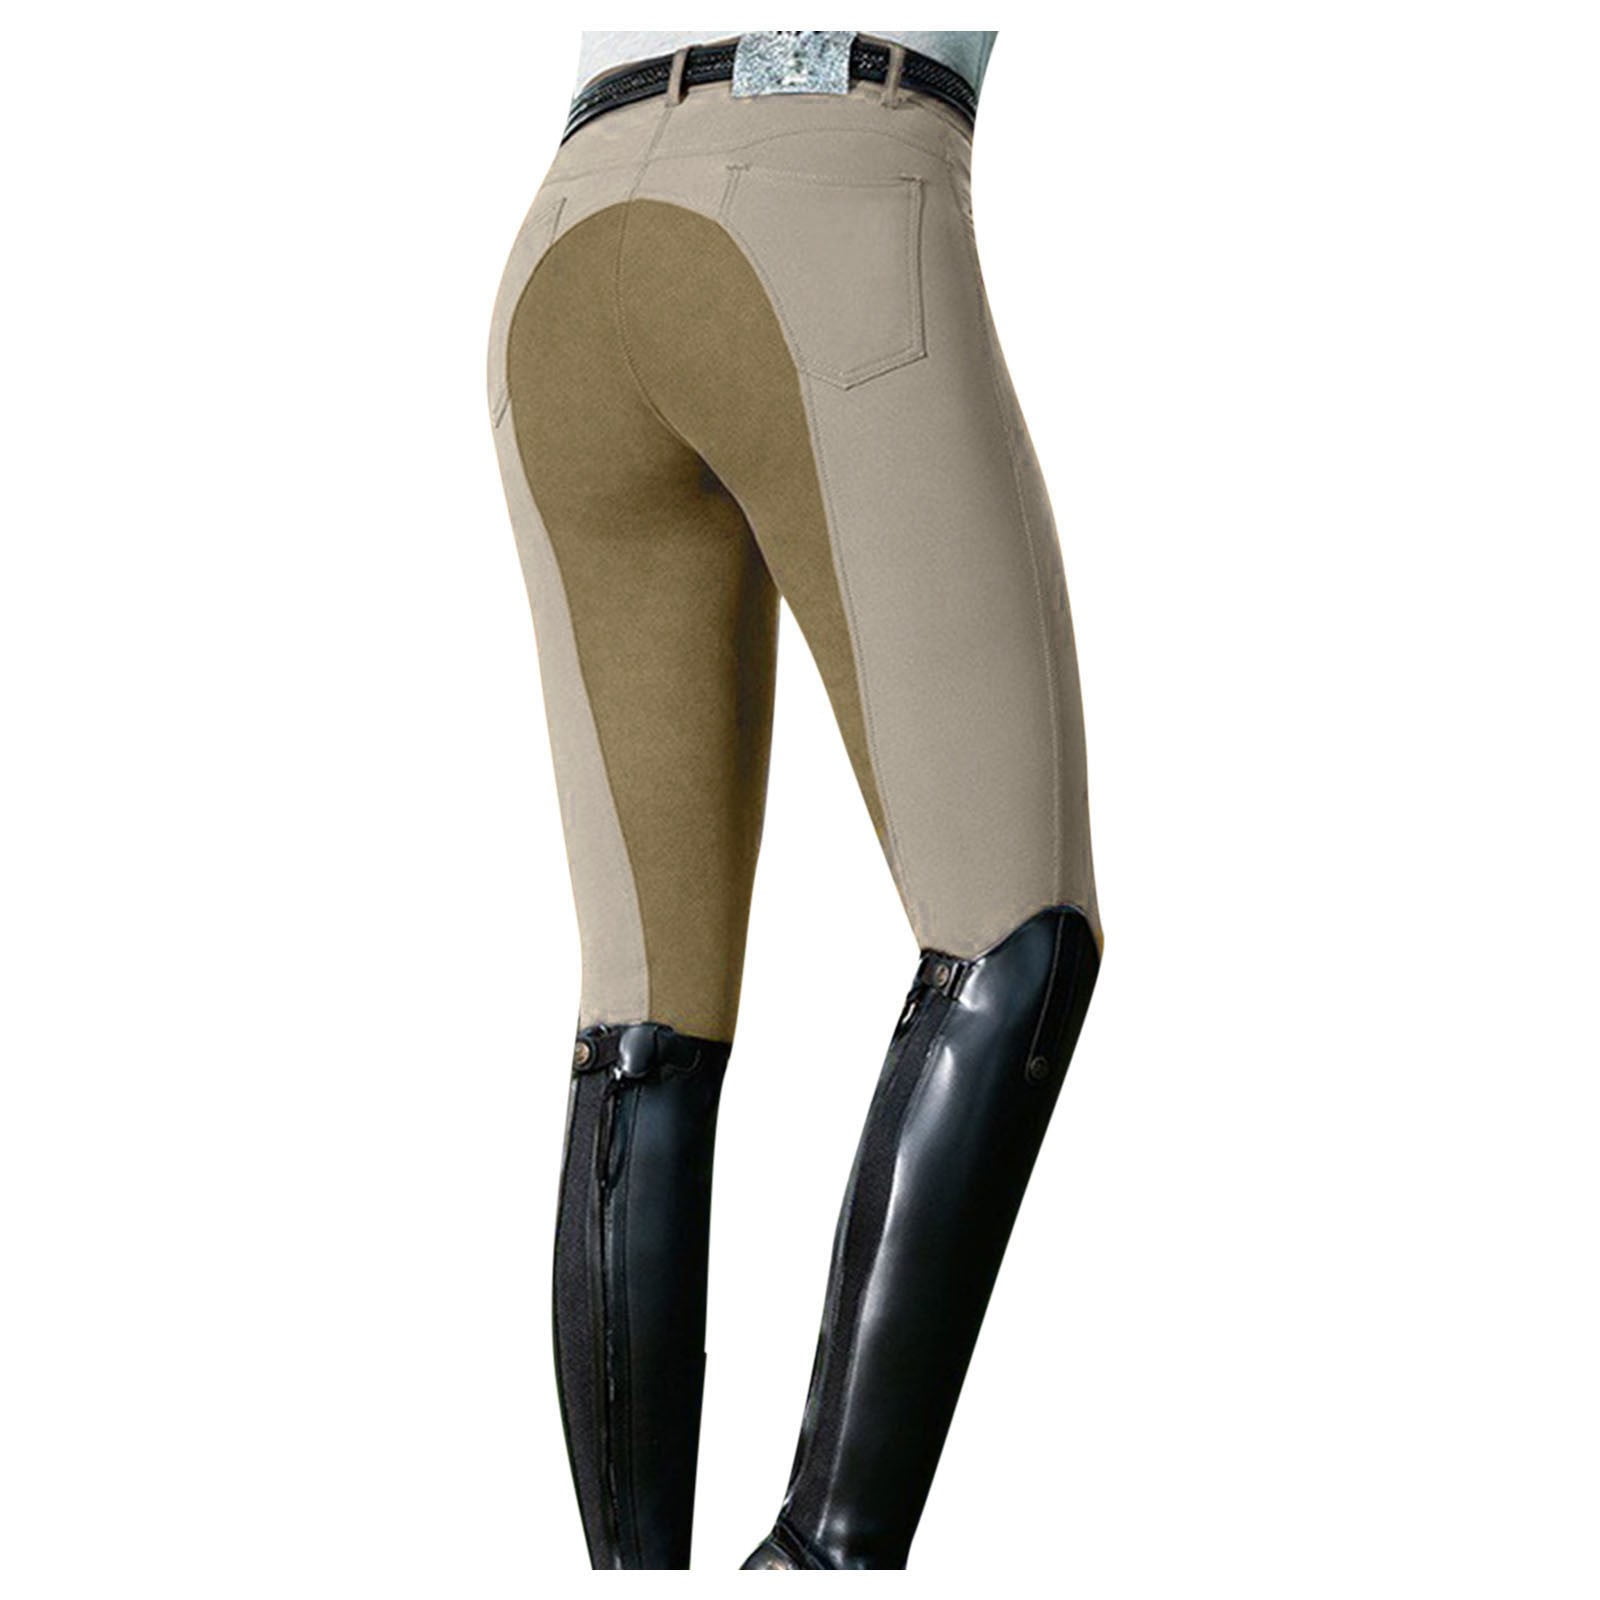 Details about   Women's Riding Pants  Exercise High Waist Sports Leggings Equestrian Trousers 